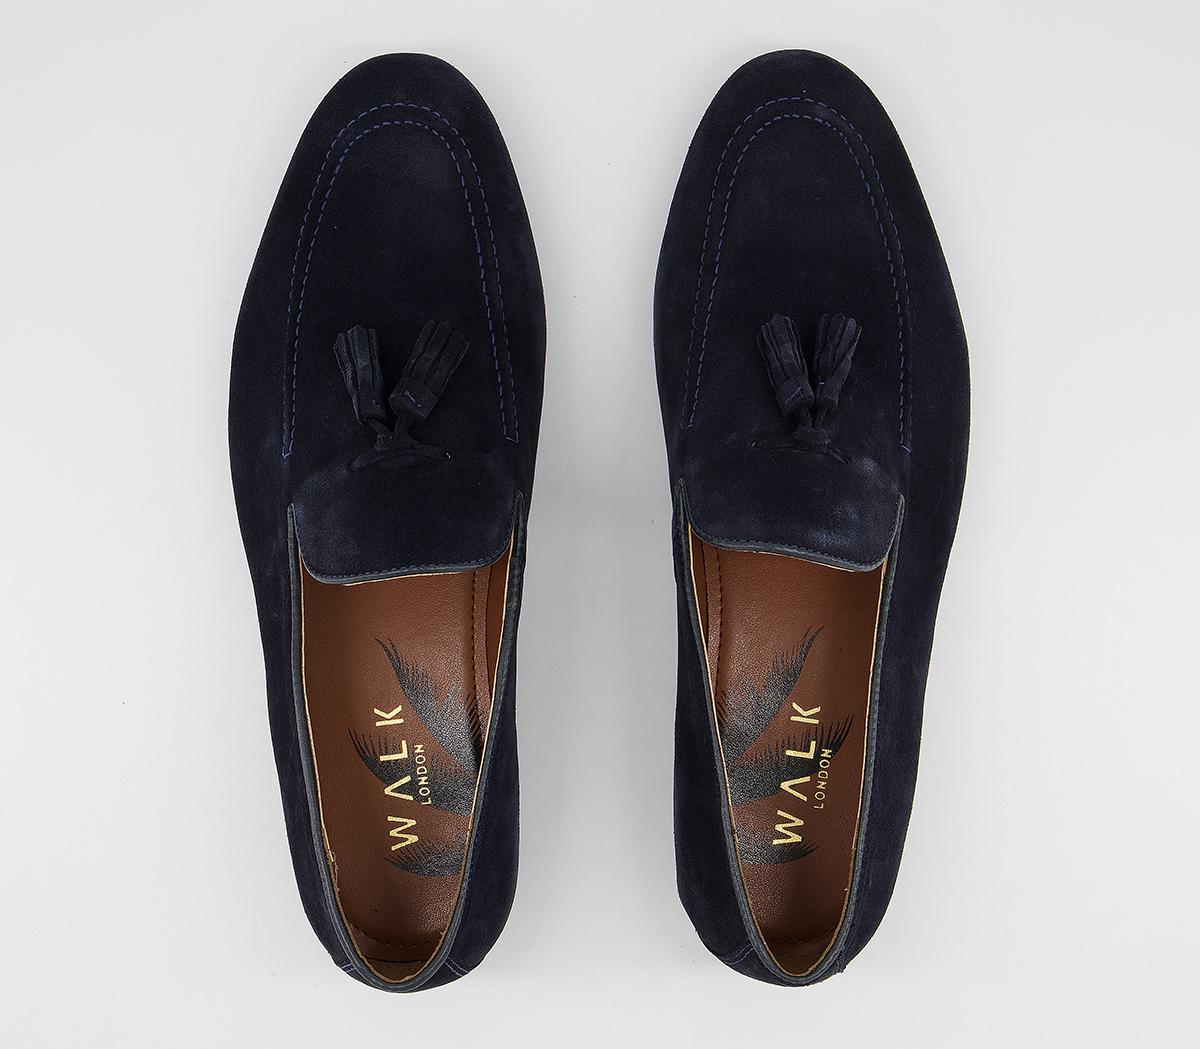 Walk London Terry Tassle Loafers Navy Suede - Casual